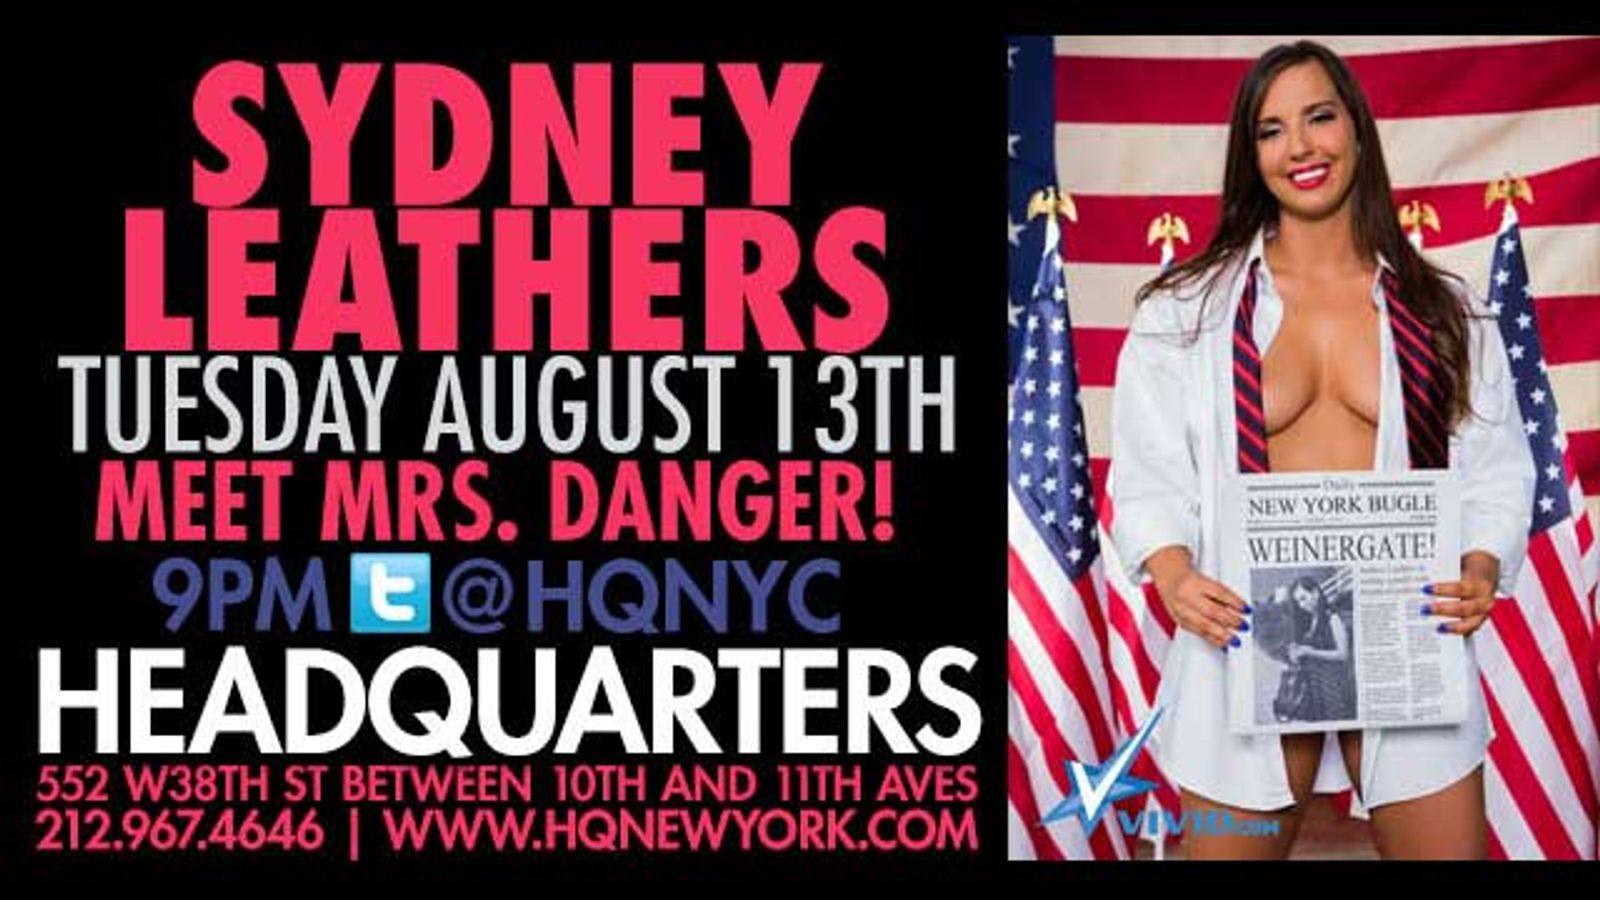 Sydney Leathers Brings 'Weinergate' to Headquarters NYC